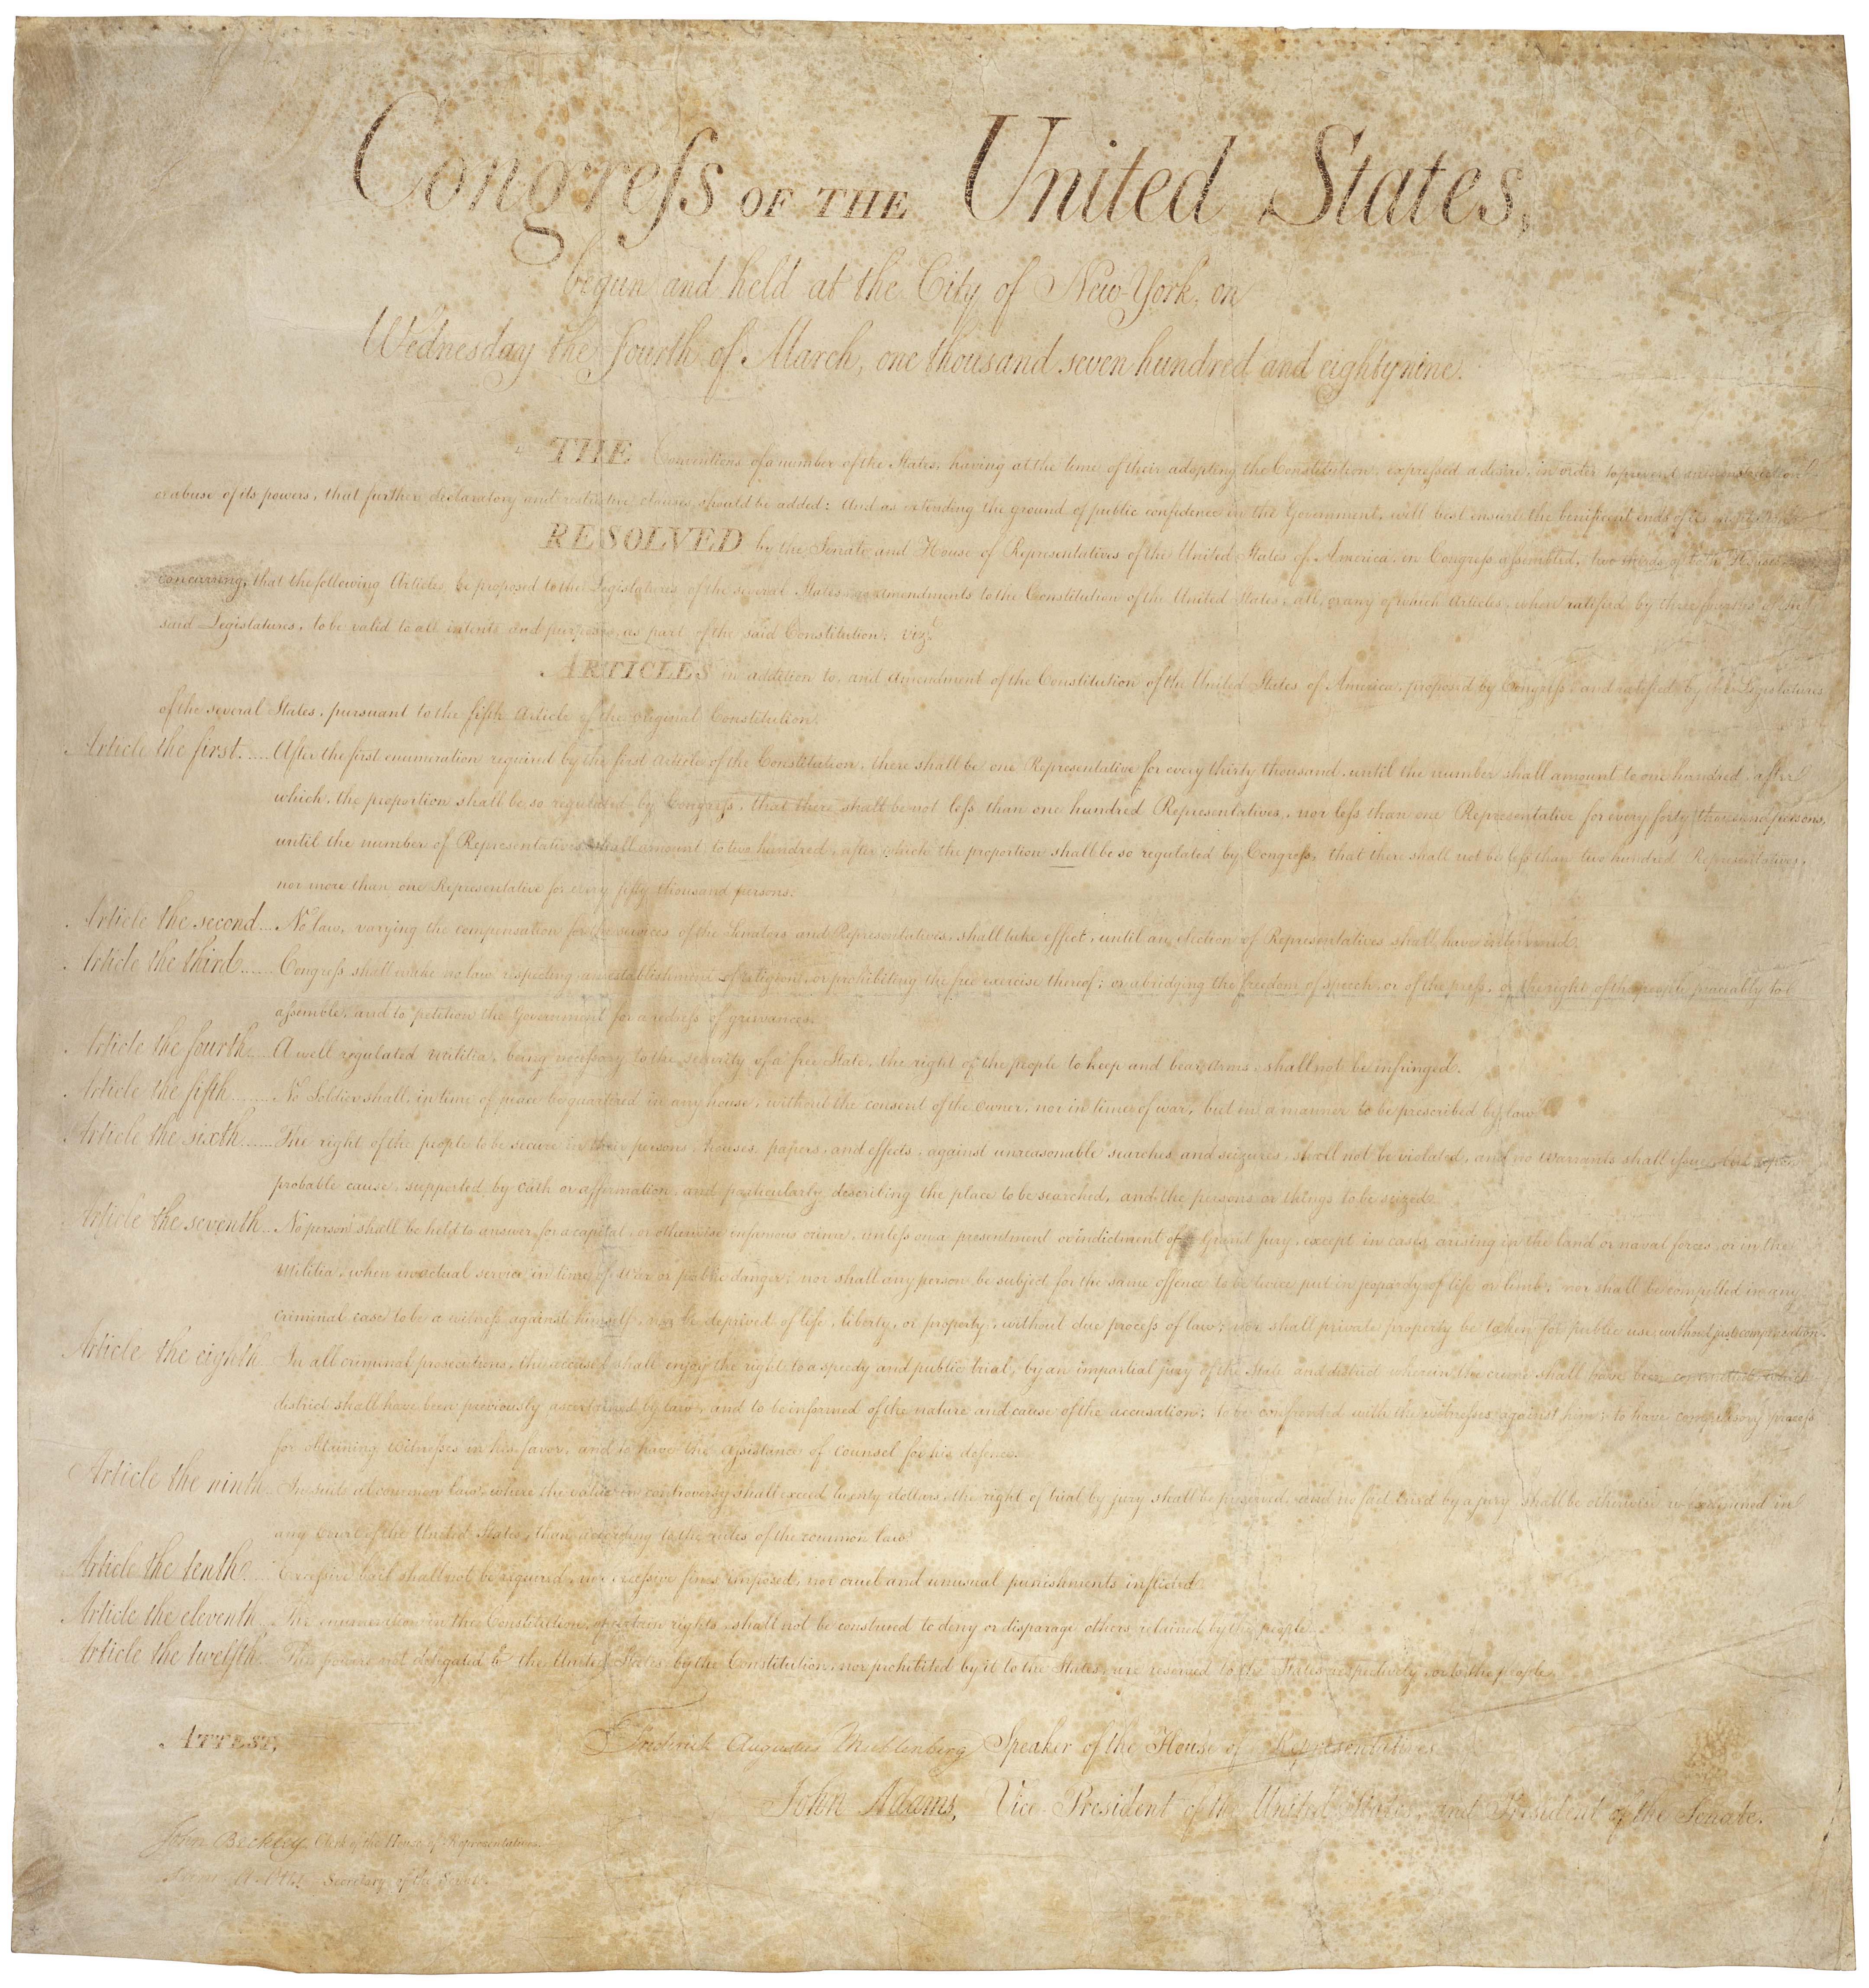 America's Founding Documents High Resolution Downloads